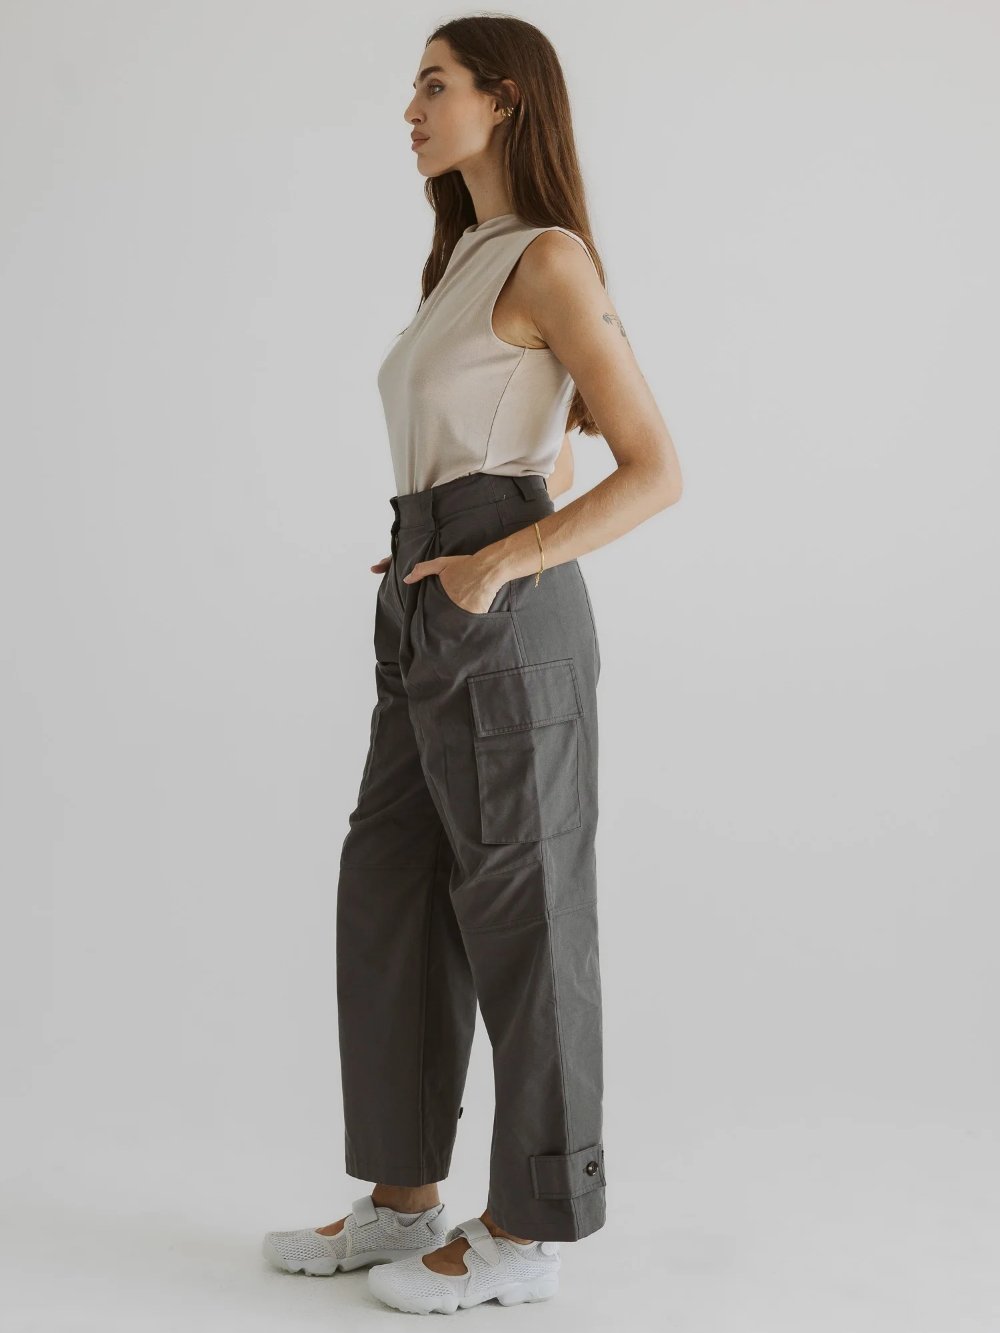 ALL : ROW MADDIE PANTS CHARCOAL